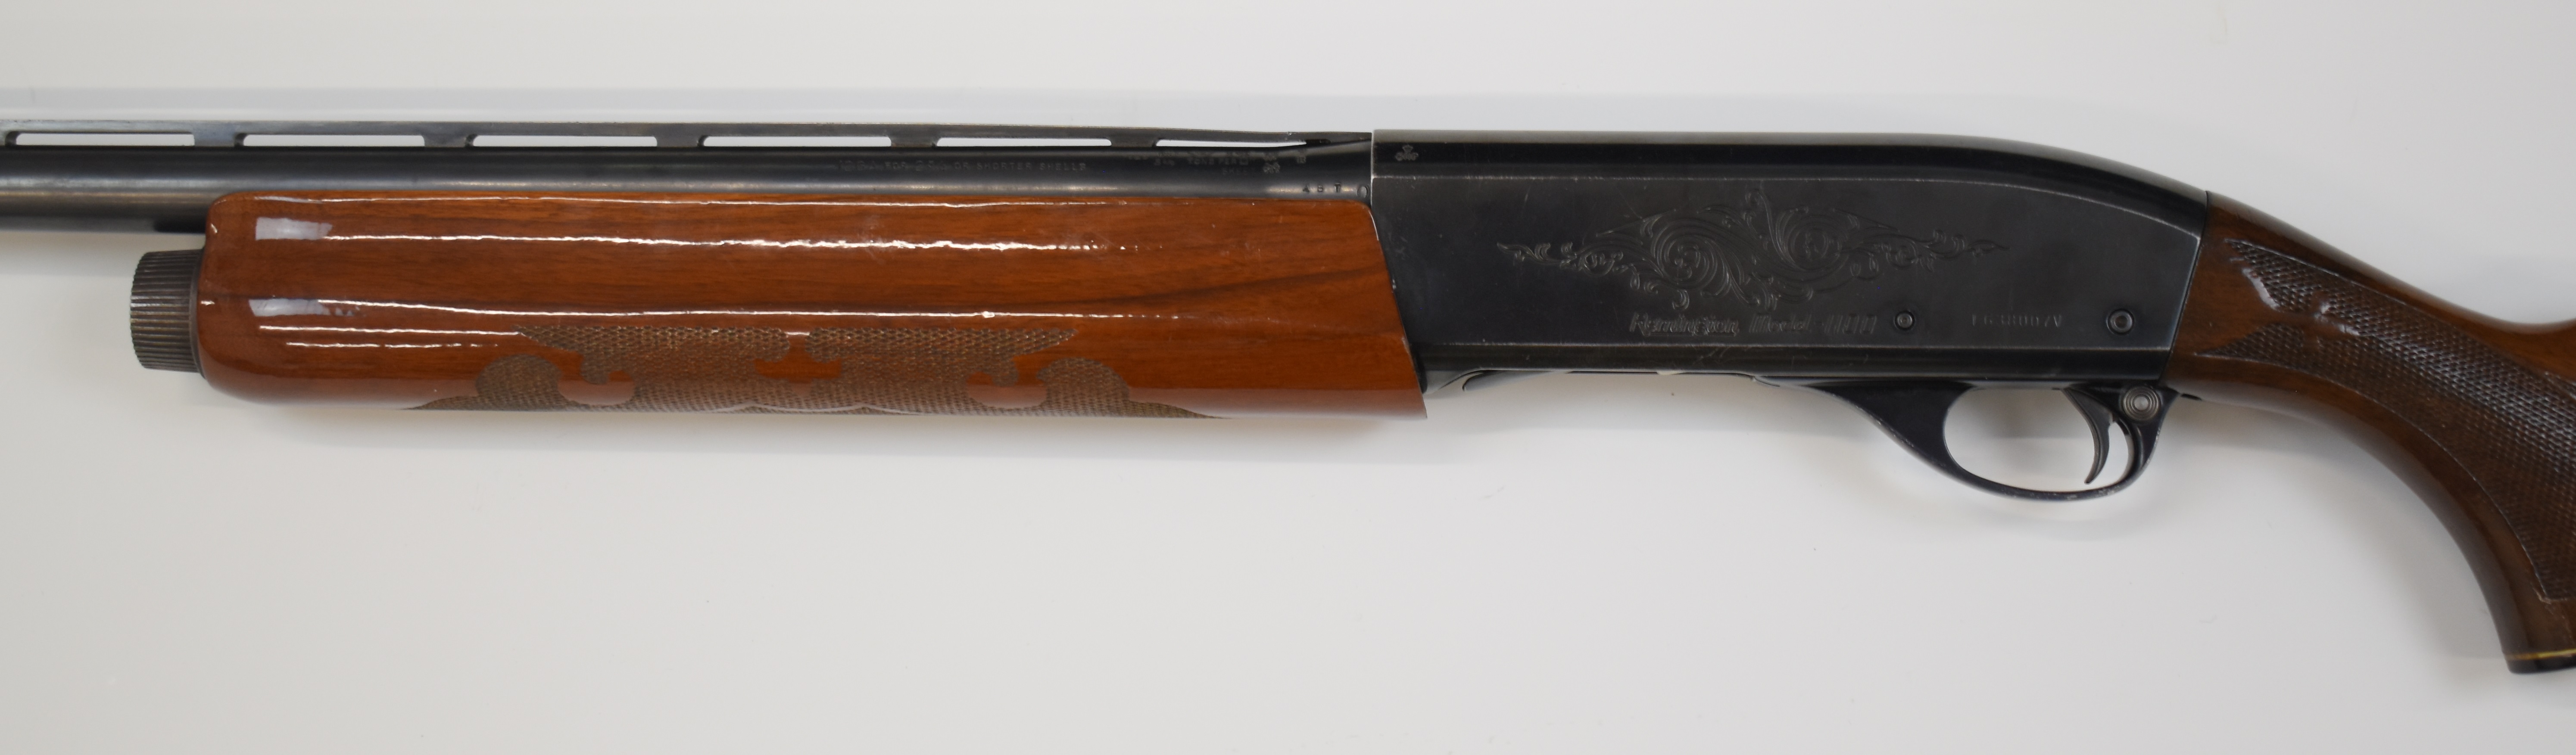 Remington Model 1100 12 bore 3-shot semi-automatic shotgun with ornately carved and chequered semi- - Image 8 of 10